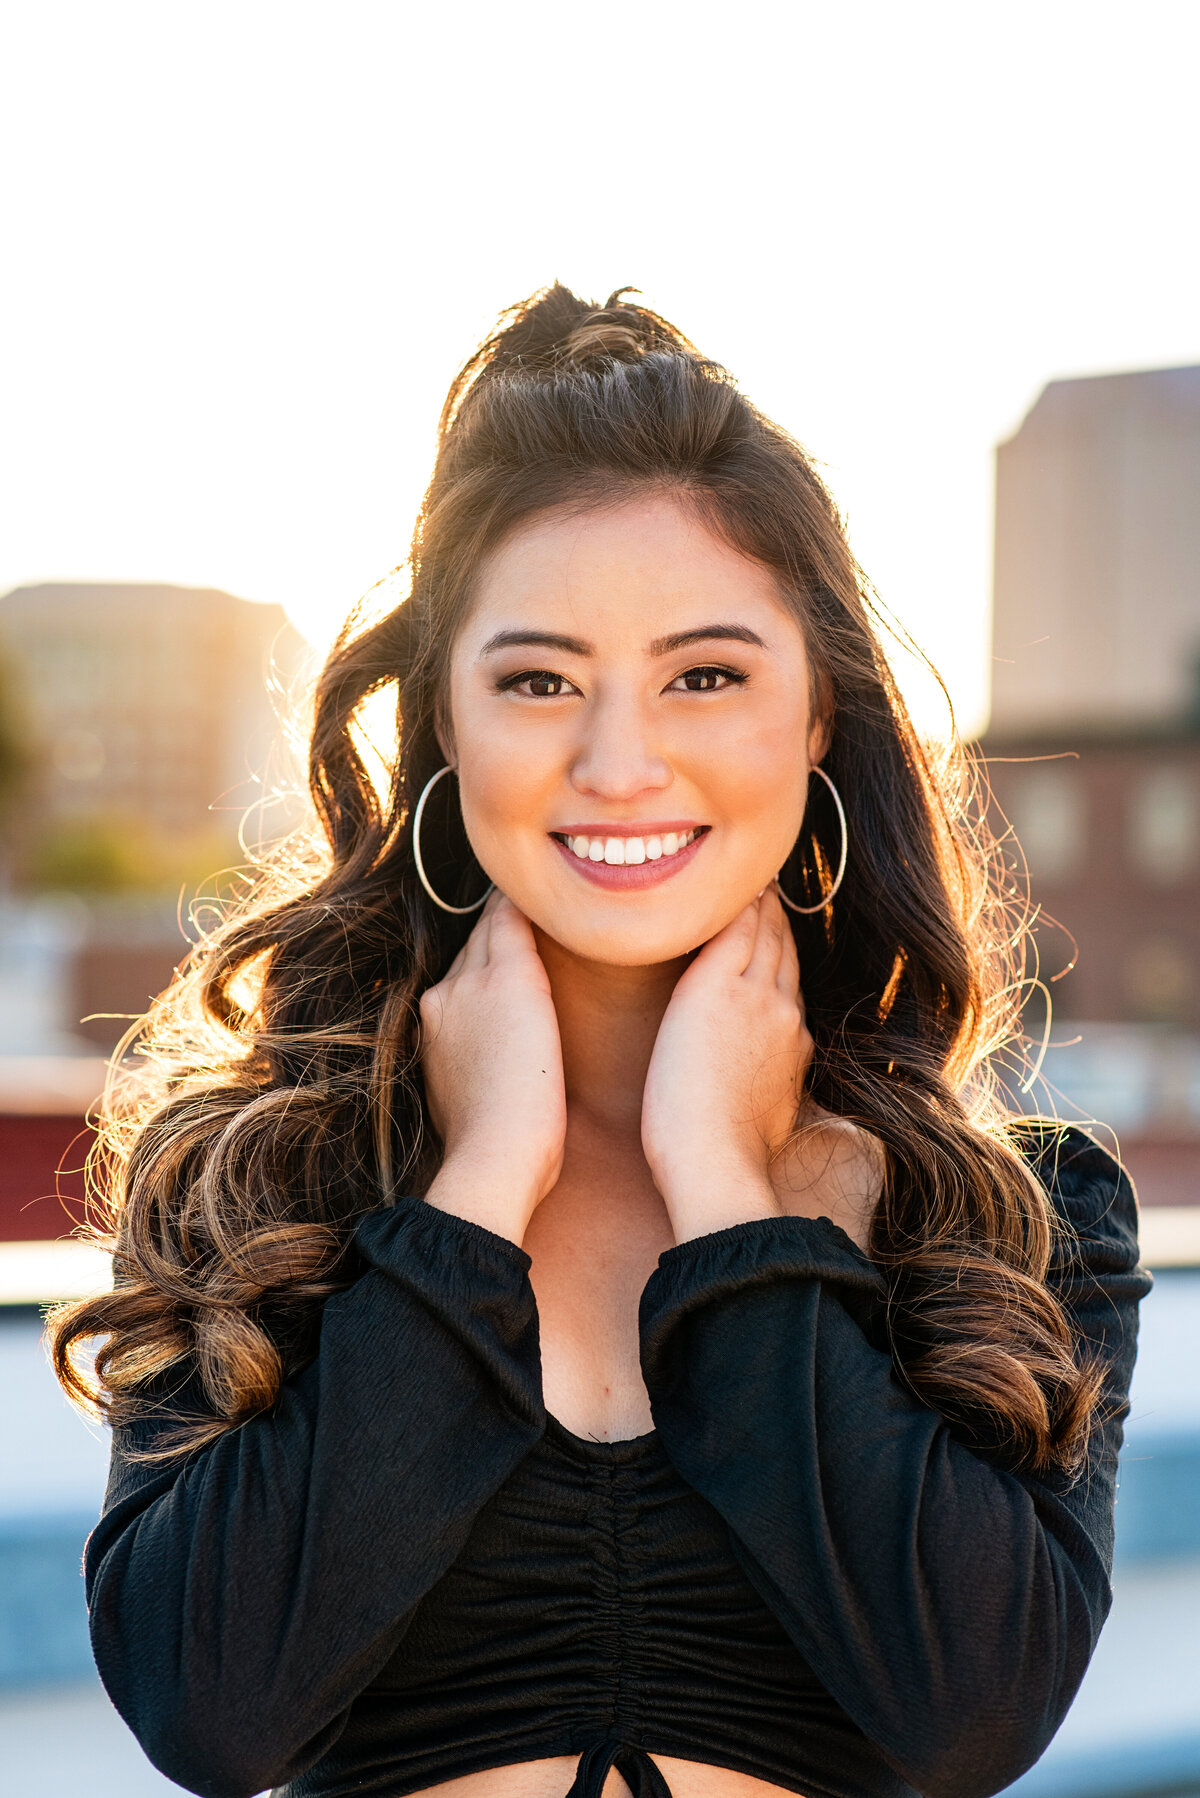 Close up portrait of senior girl smiling on rooftop at sunset.